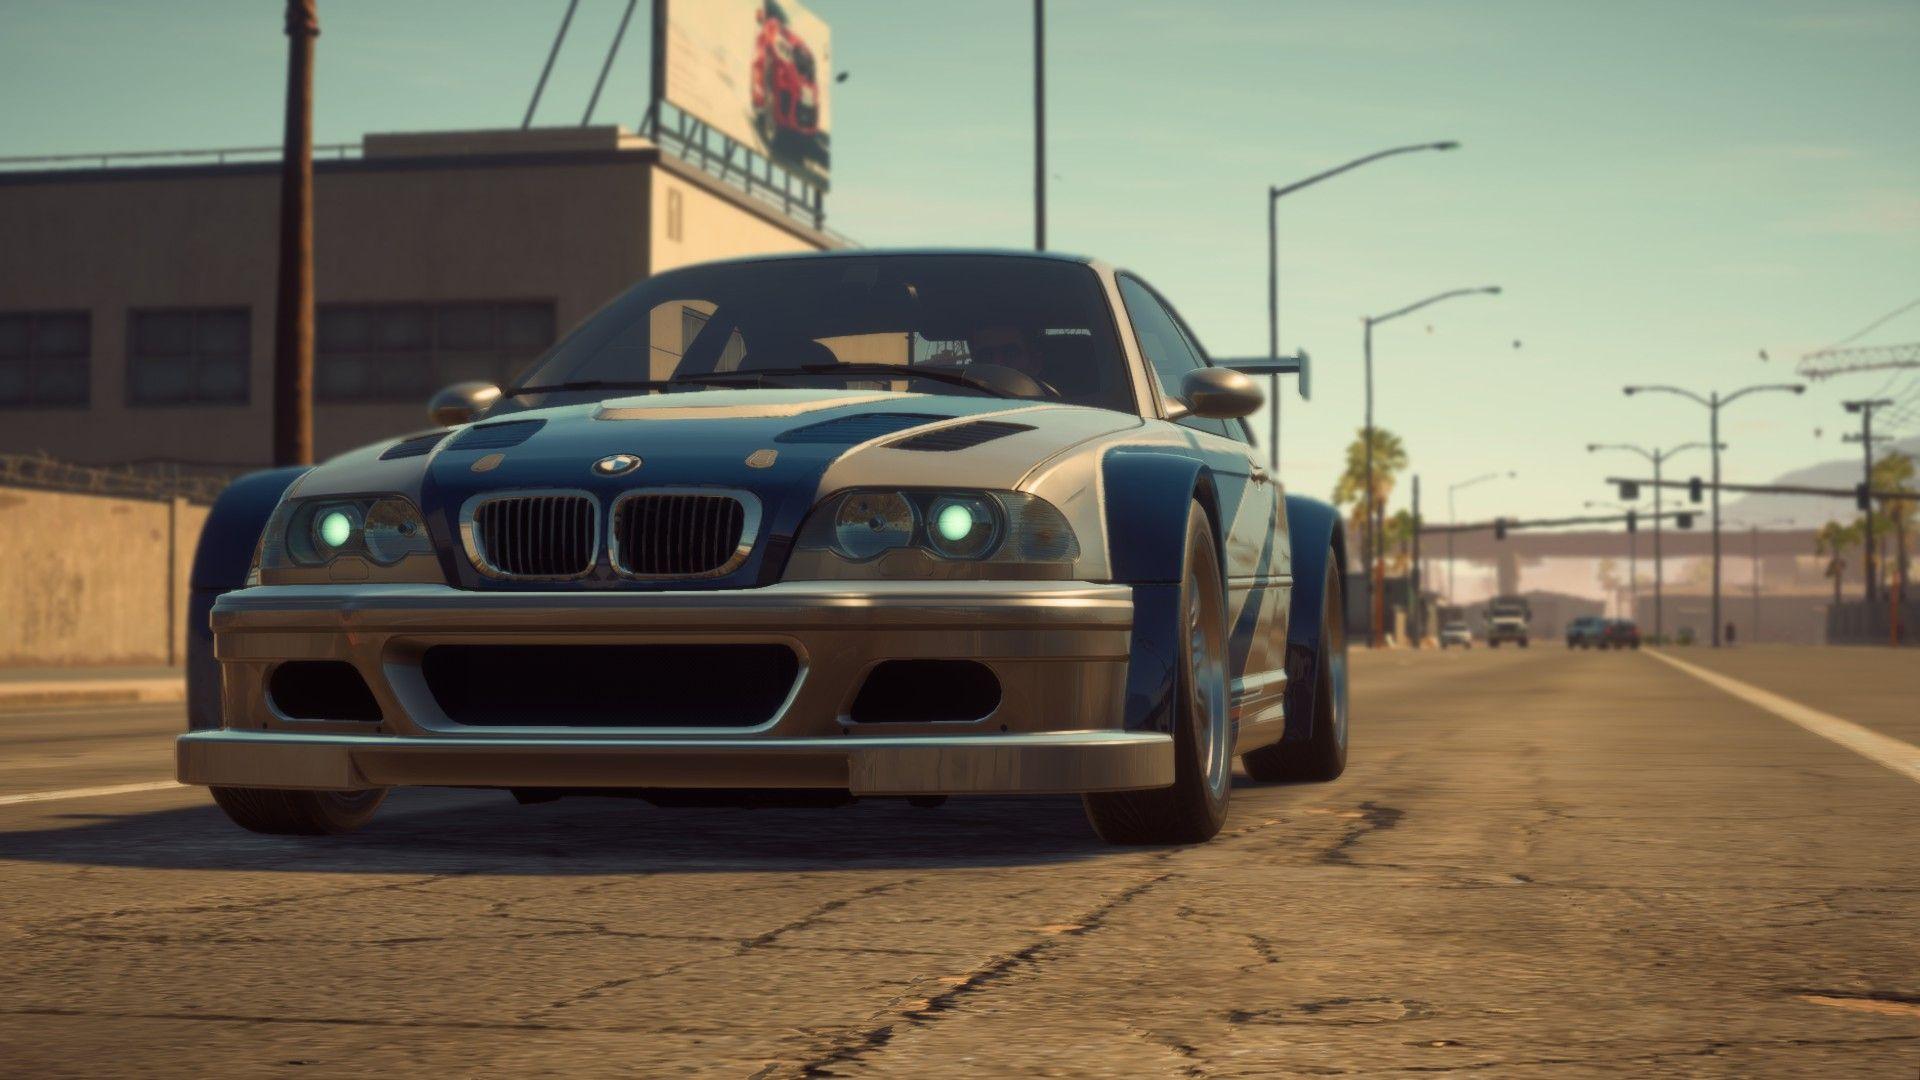 The player's BMW M3 E46 GTR from Most Wanted 2005 1